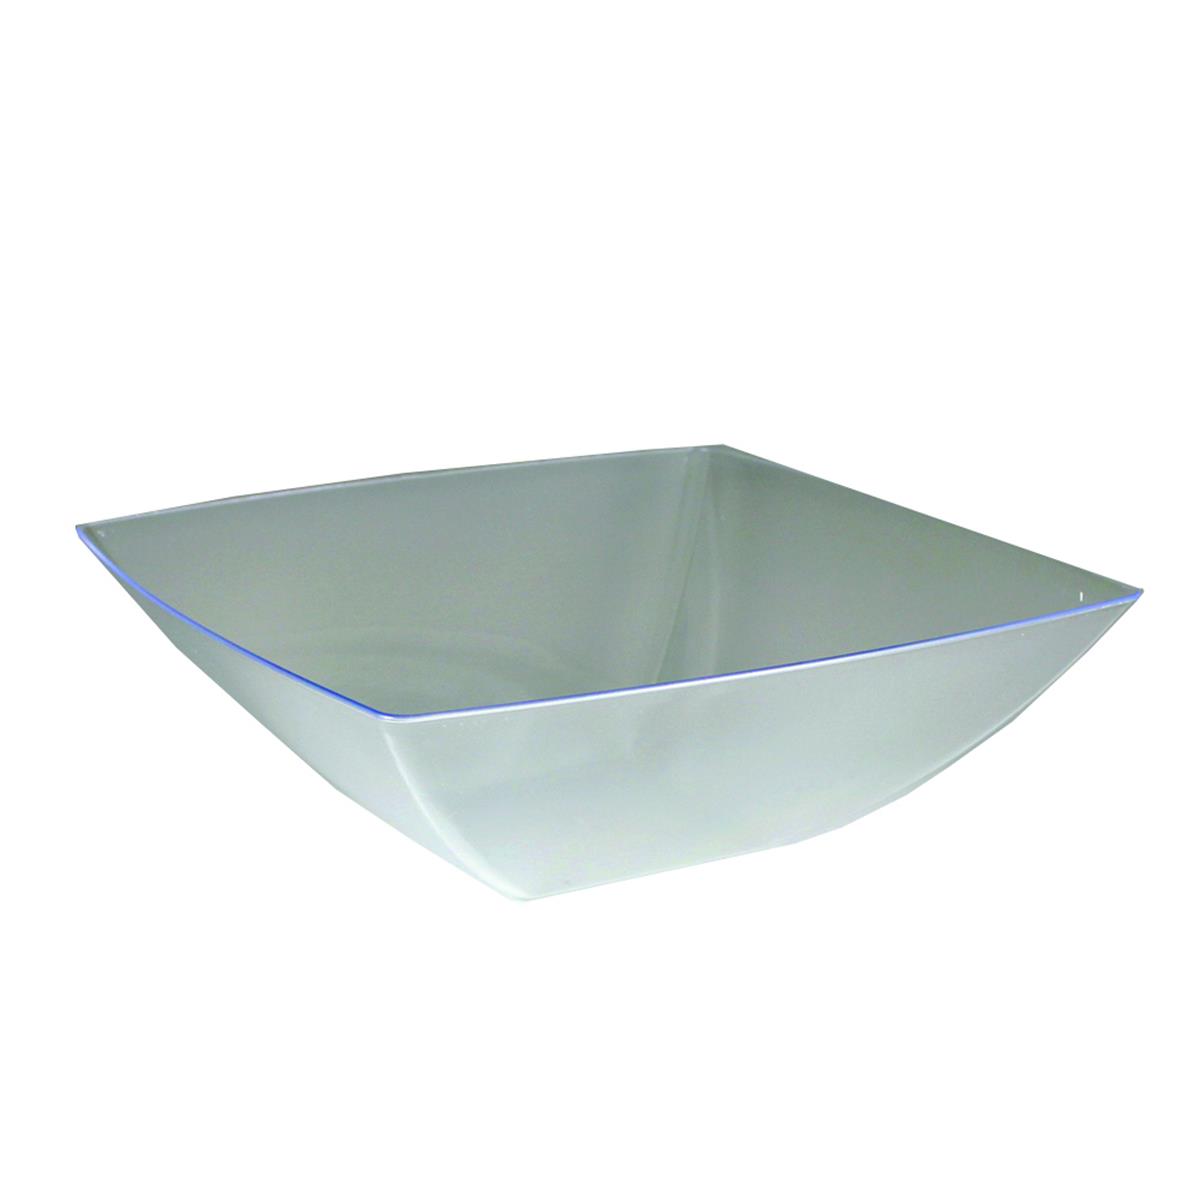 Sq81286 Pec 128 Oz Clear Simply Squared Bowl - Case Of 12